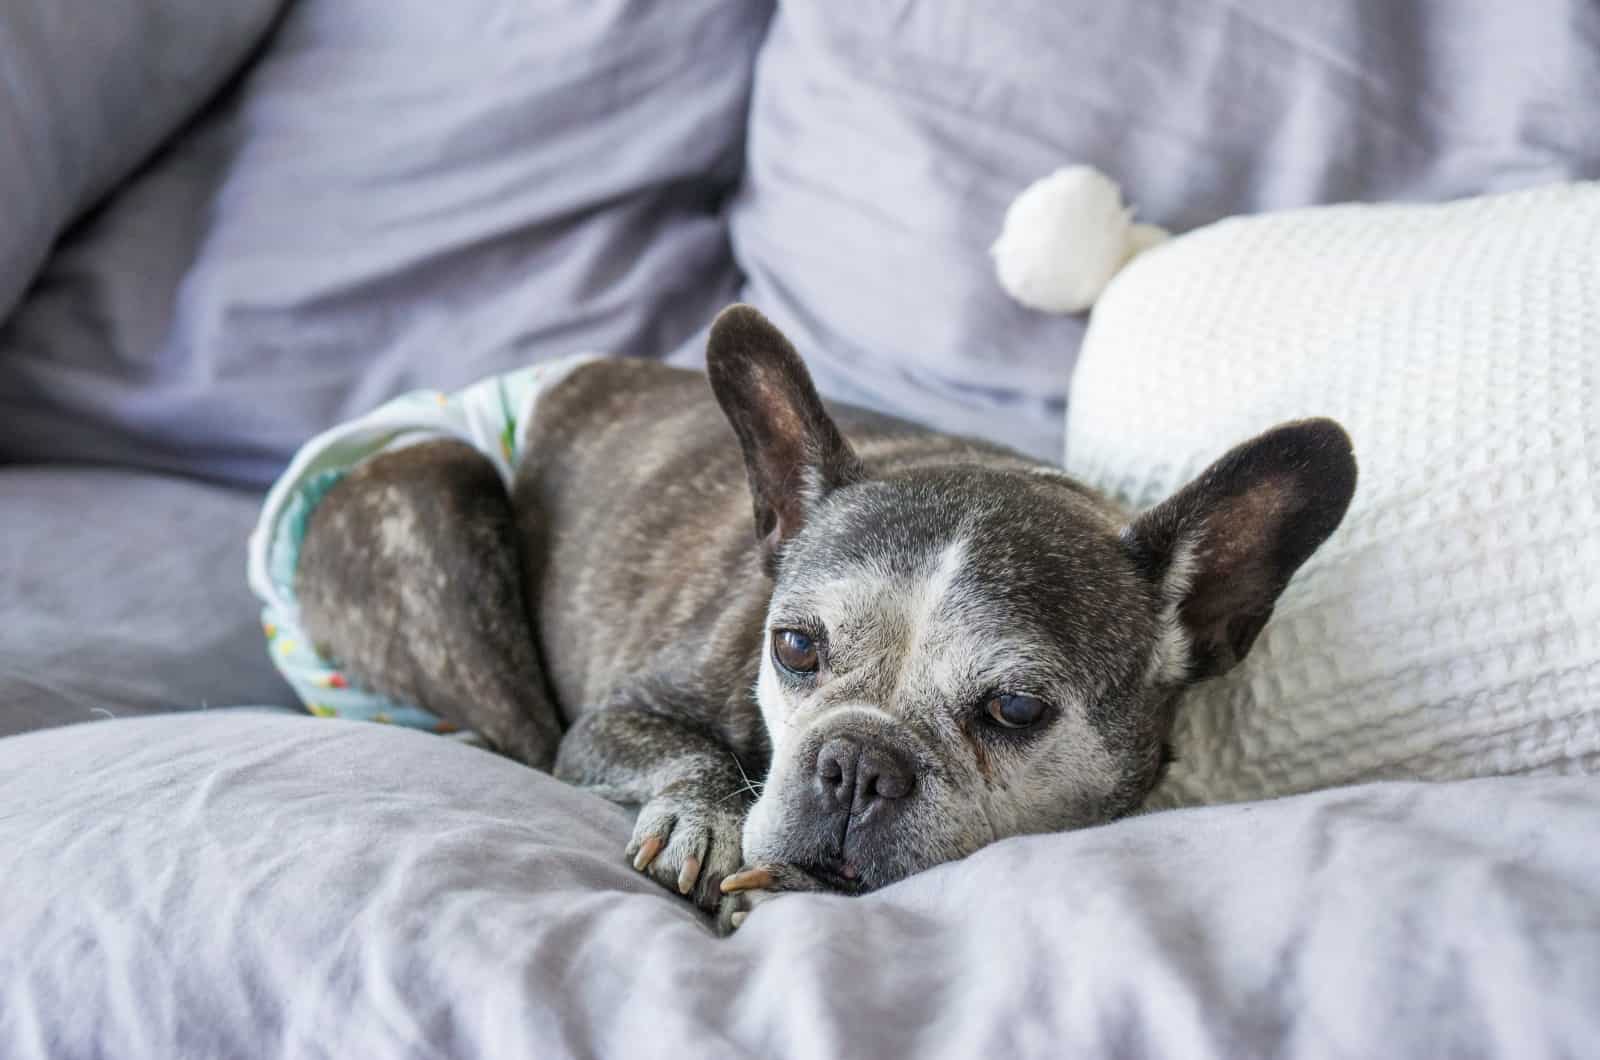 When To Euthanize A Sick Frenchie? 5 Final Health Conditions